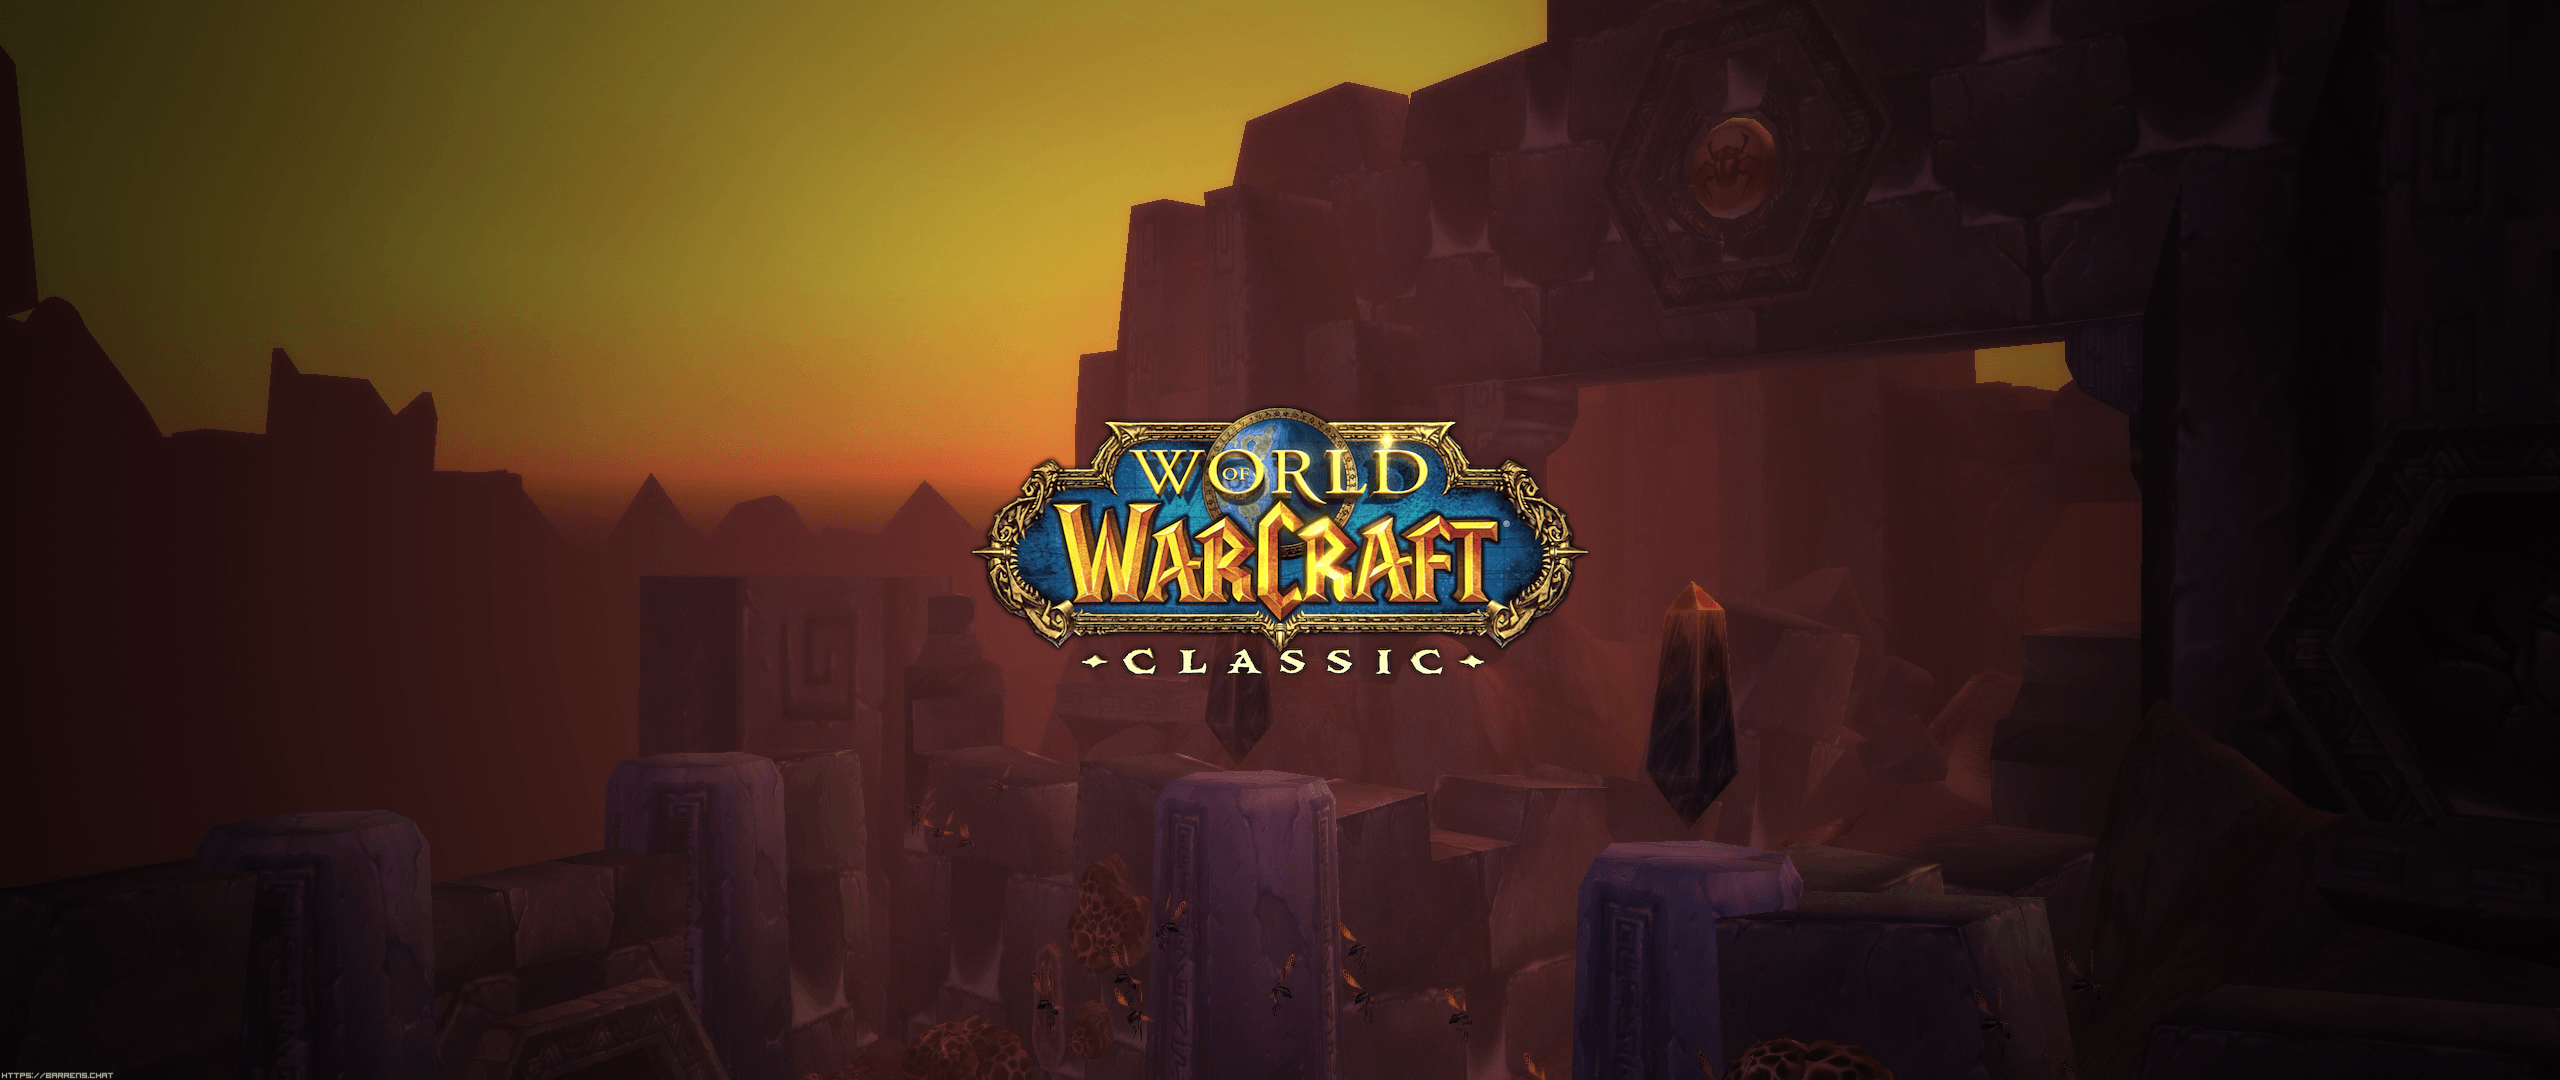 Ultrawide Wallpaper • Each Dungeon and Raid • WoW Classic • Barrens